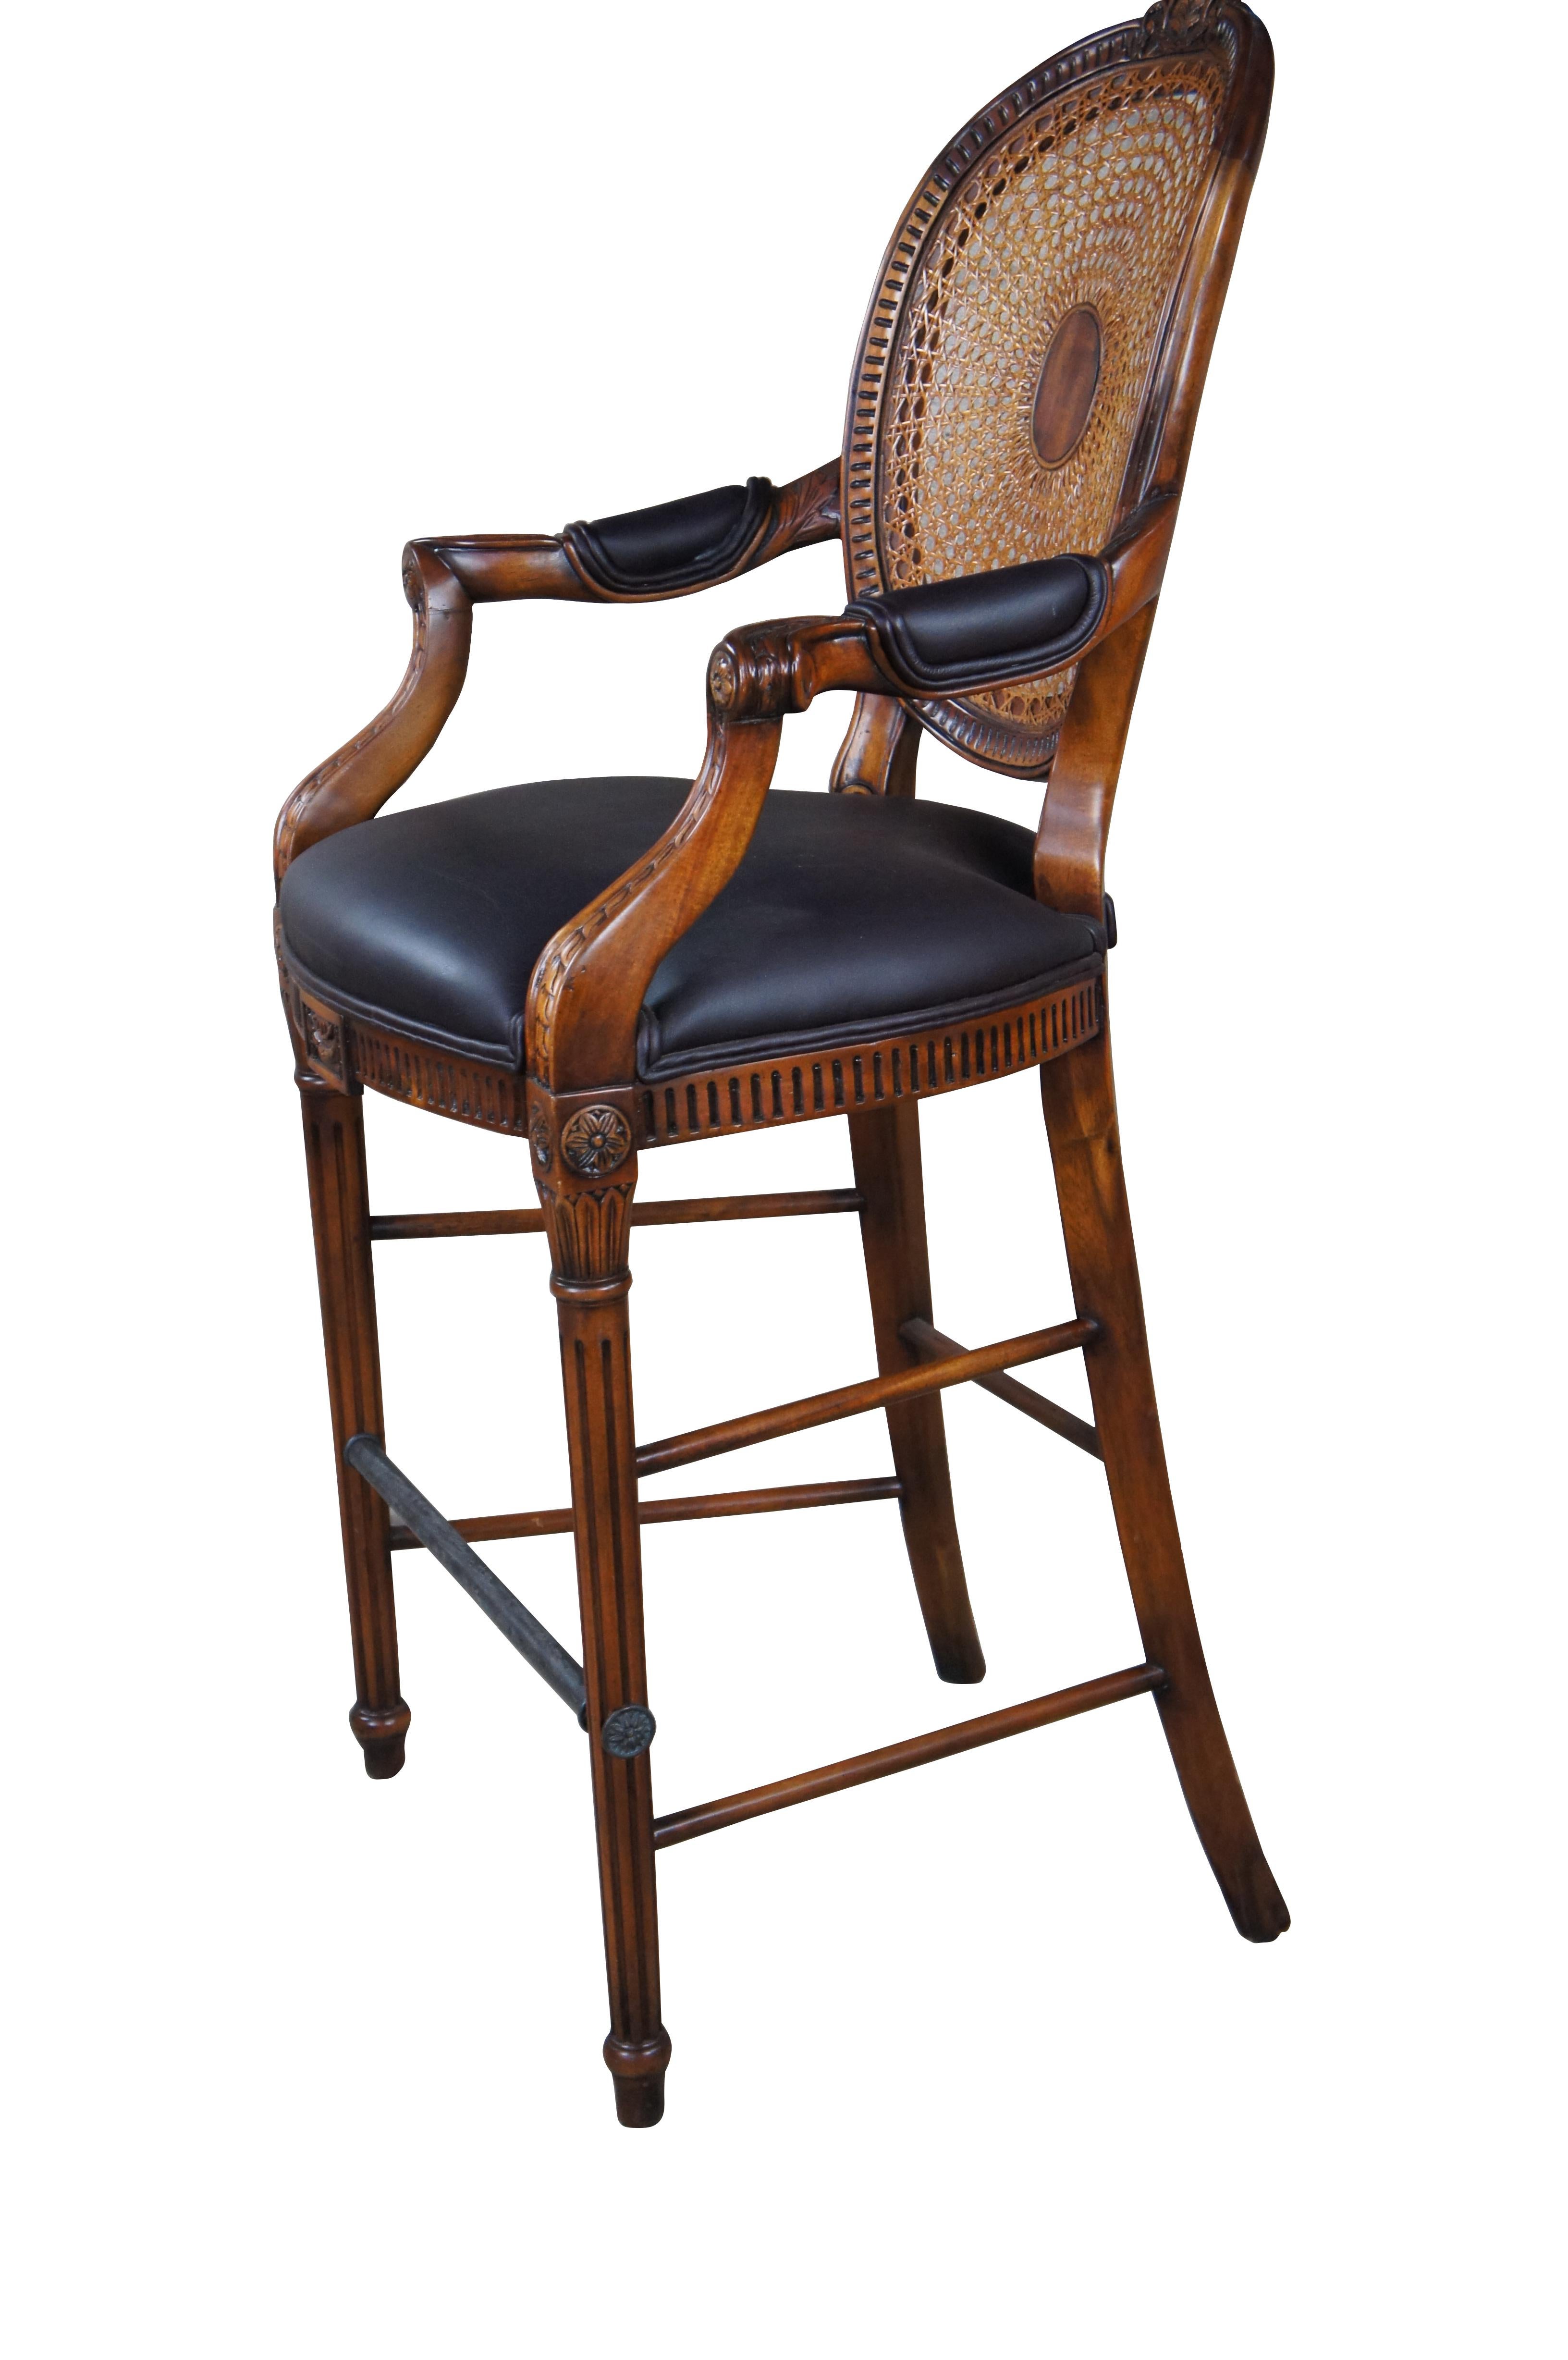 Theodore Alexander Louis XV Style Carved Mahogany & Leather Cane Back Bar Stool In Good Condition For Sale In Dayton, OH